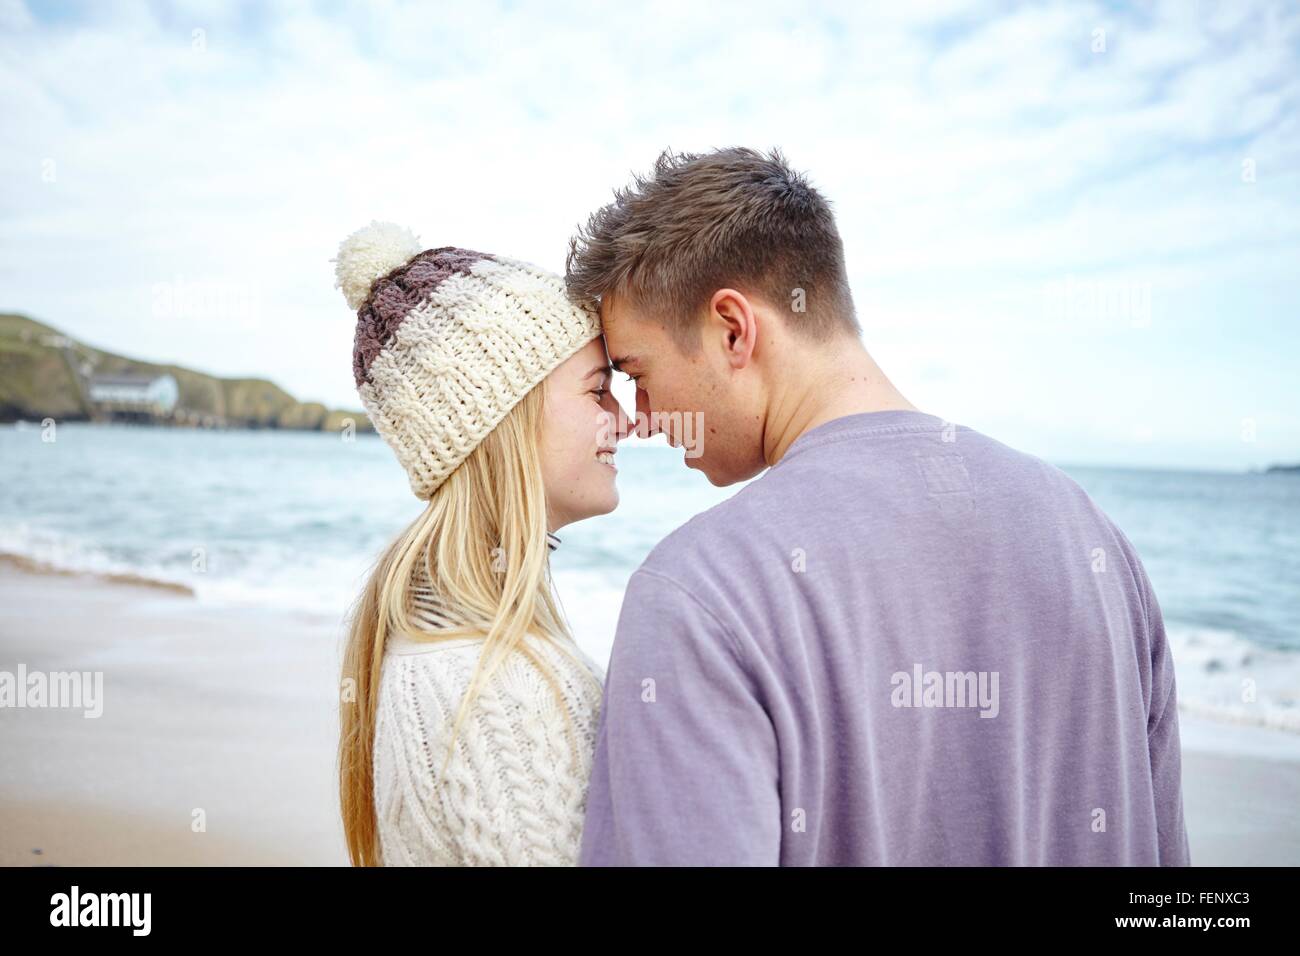 Romantic young couple face to face on beach, Constantine Bay, Cornwall, UK Stock Photo